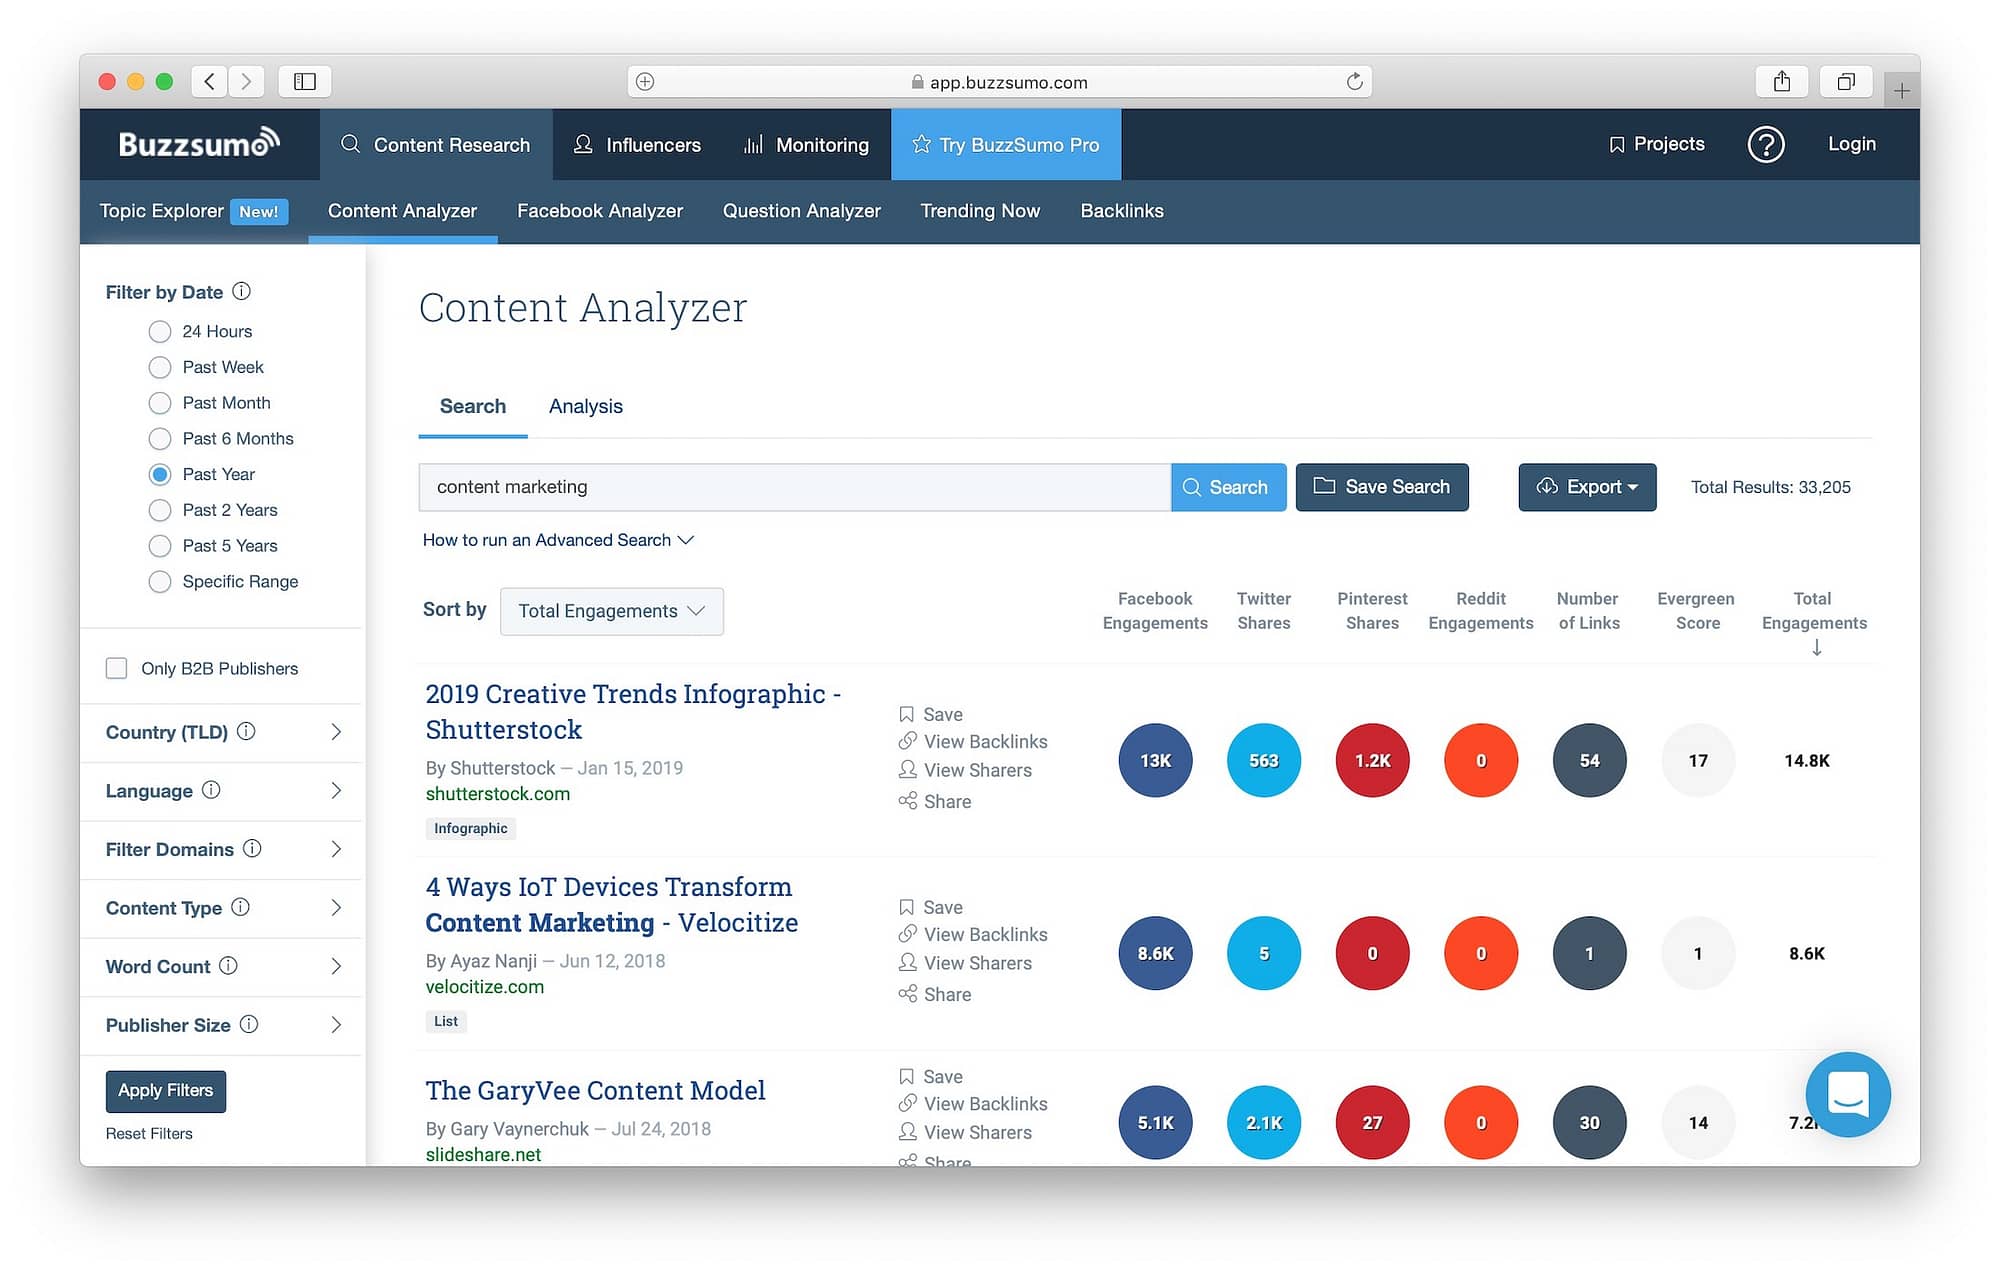 Buzzsumo - great tool to master as you're starting a blog